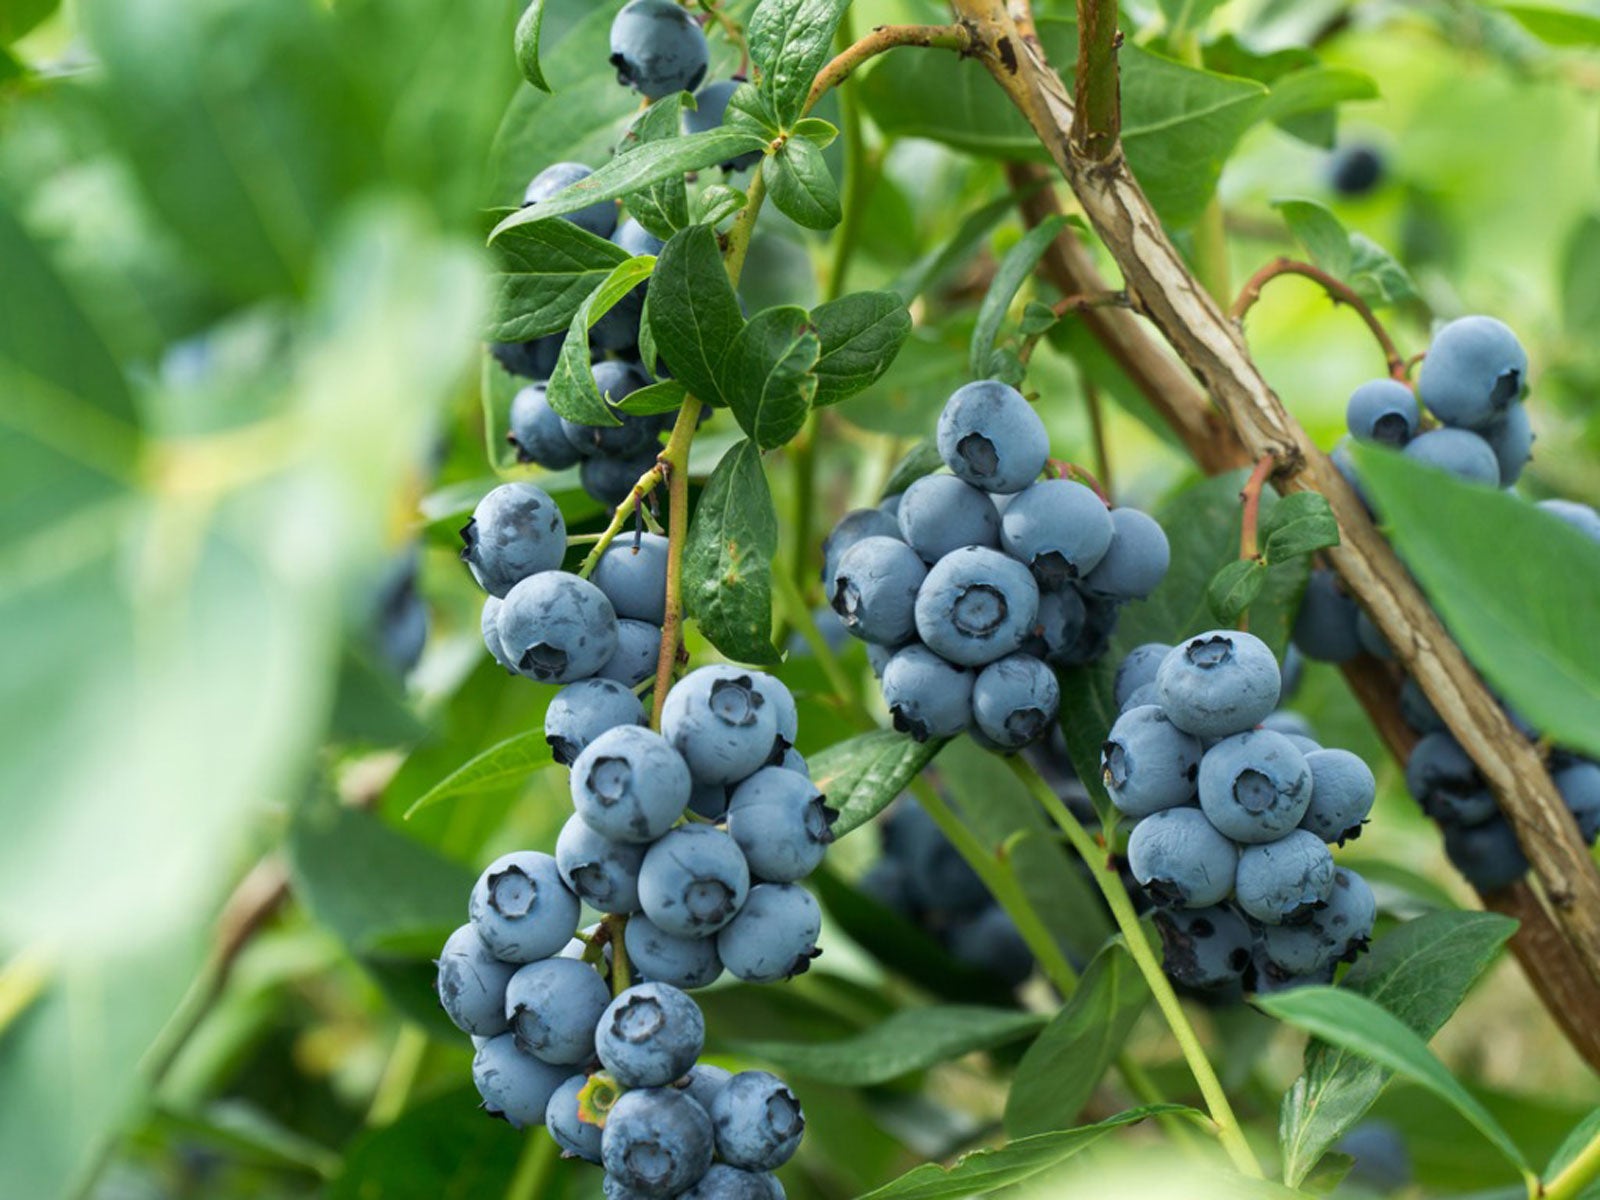 Growing Blueberry Bushes - Tips For Blueberry Plant Care